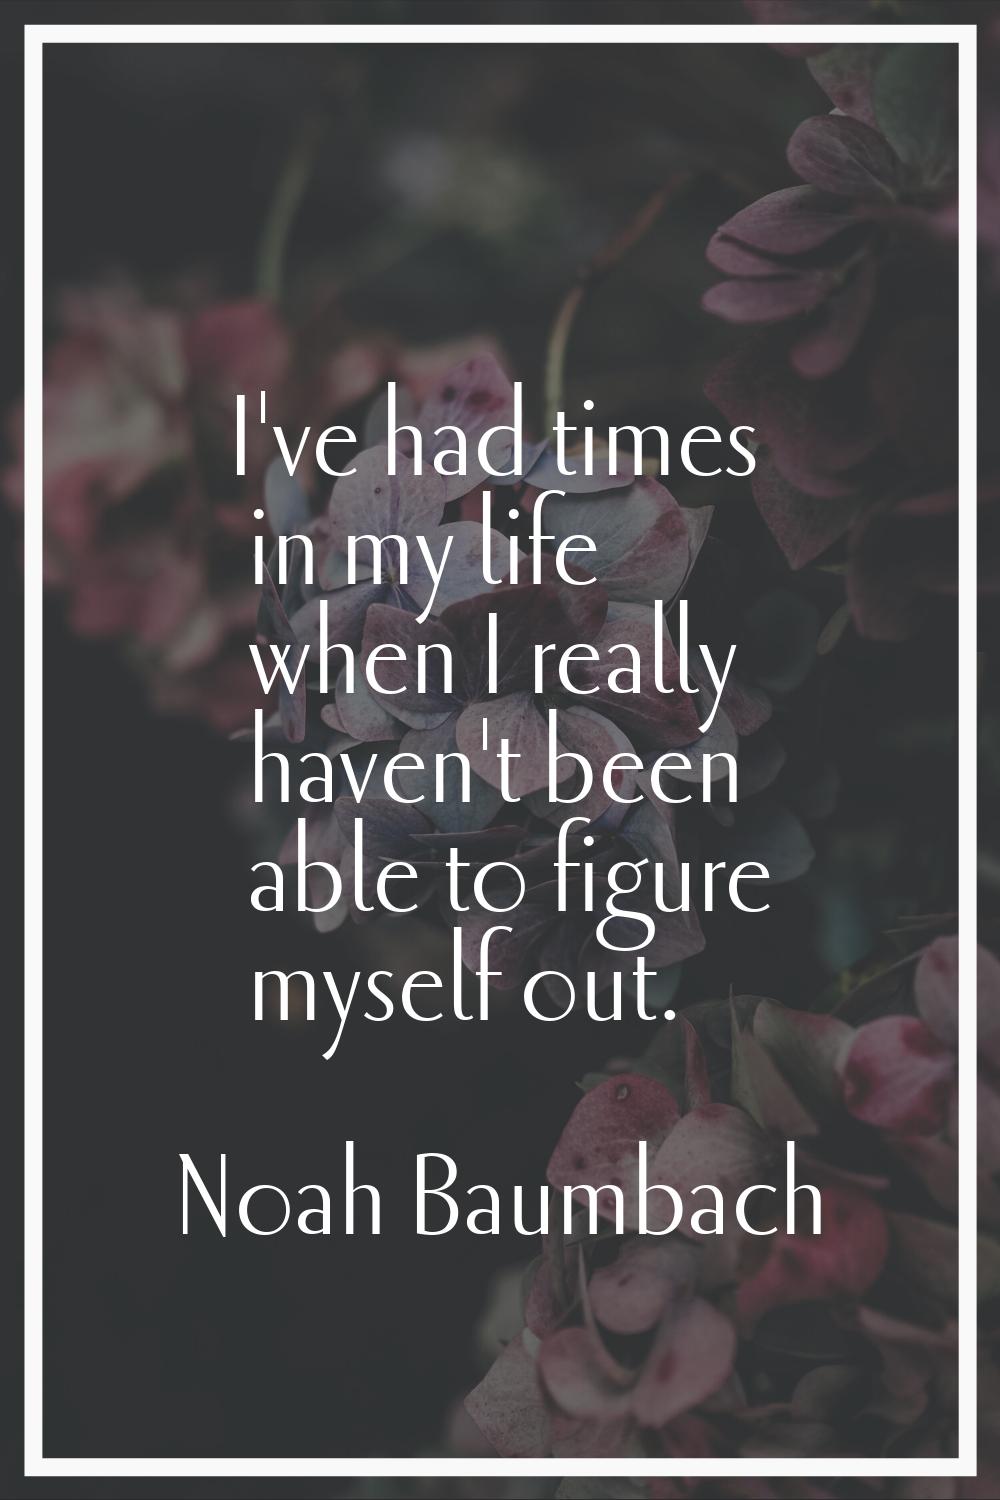 I've had times in my life when I really haven't been able to figure myself out.